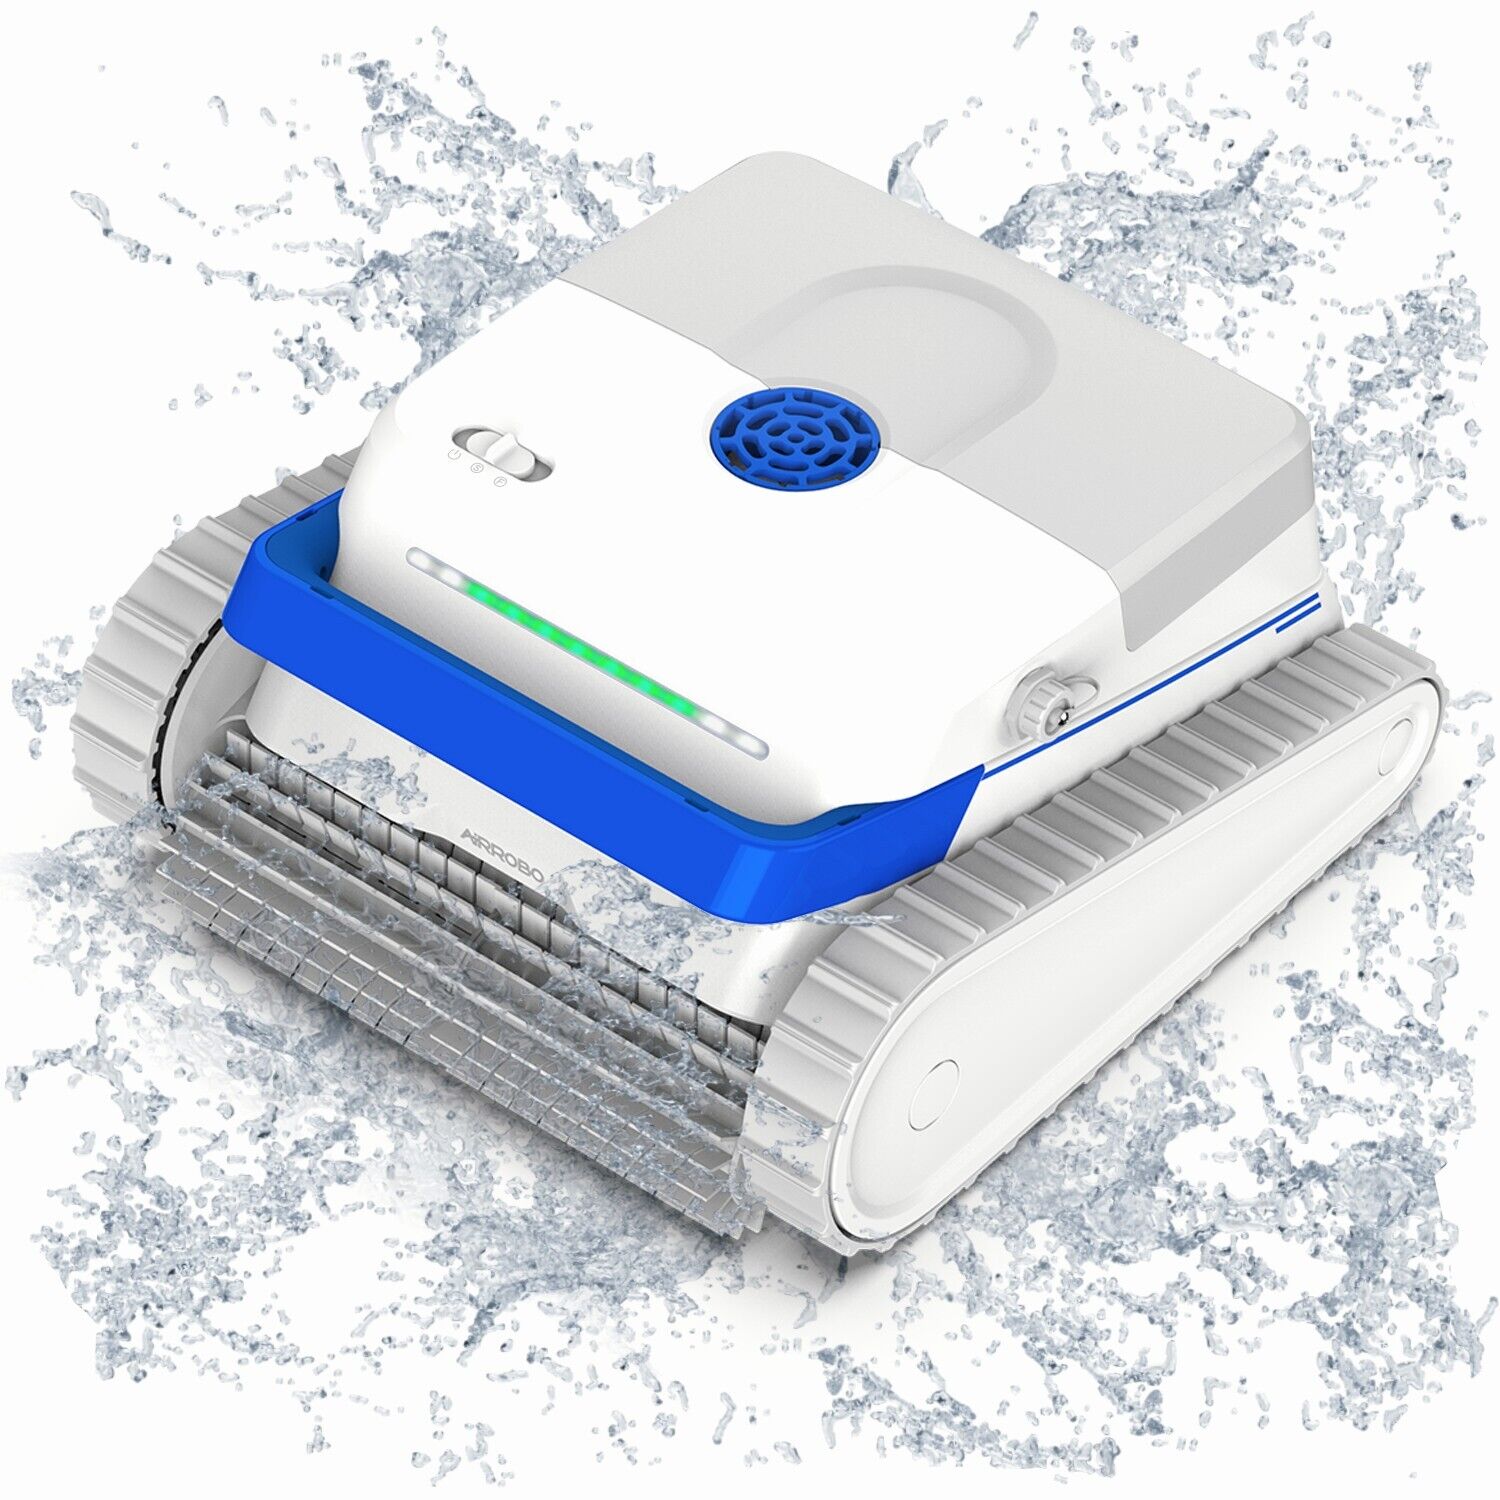 AIRROBO PC100 Cordless Robotic Pool Cleaner for Inground & Above Ground Pool